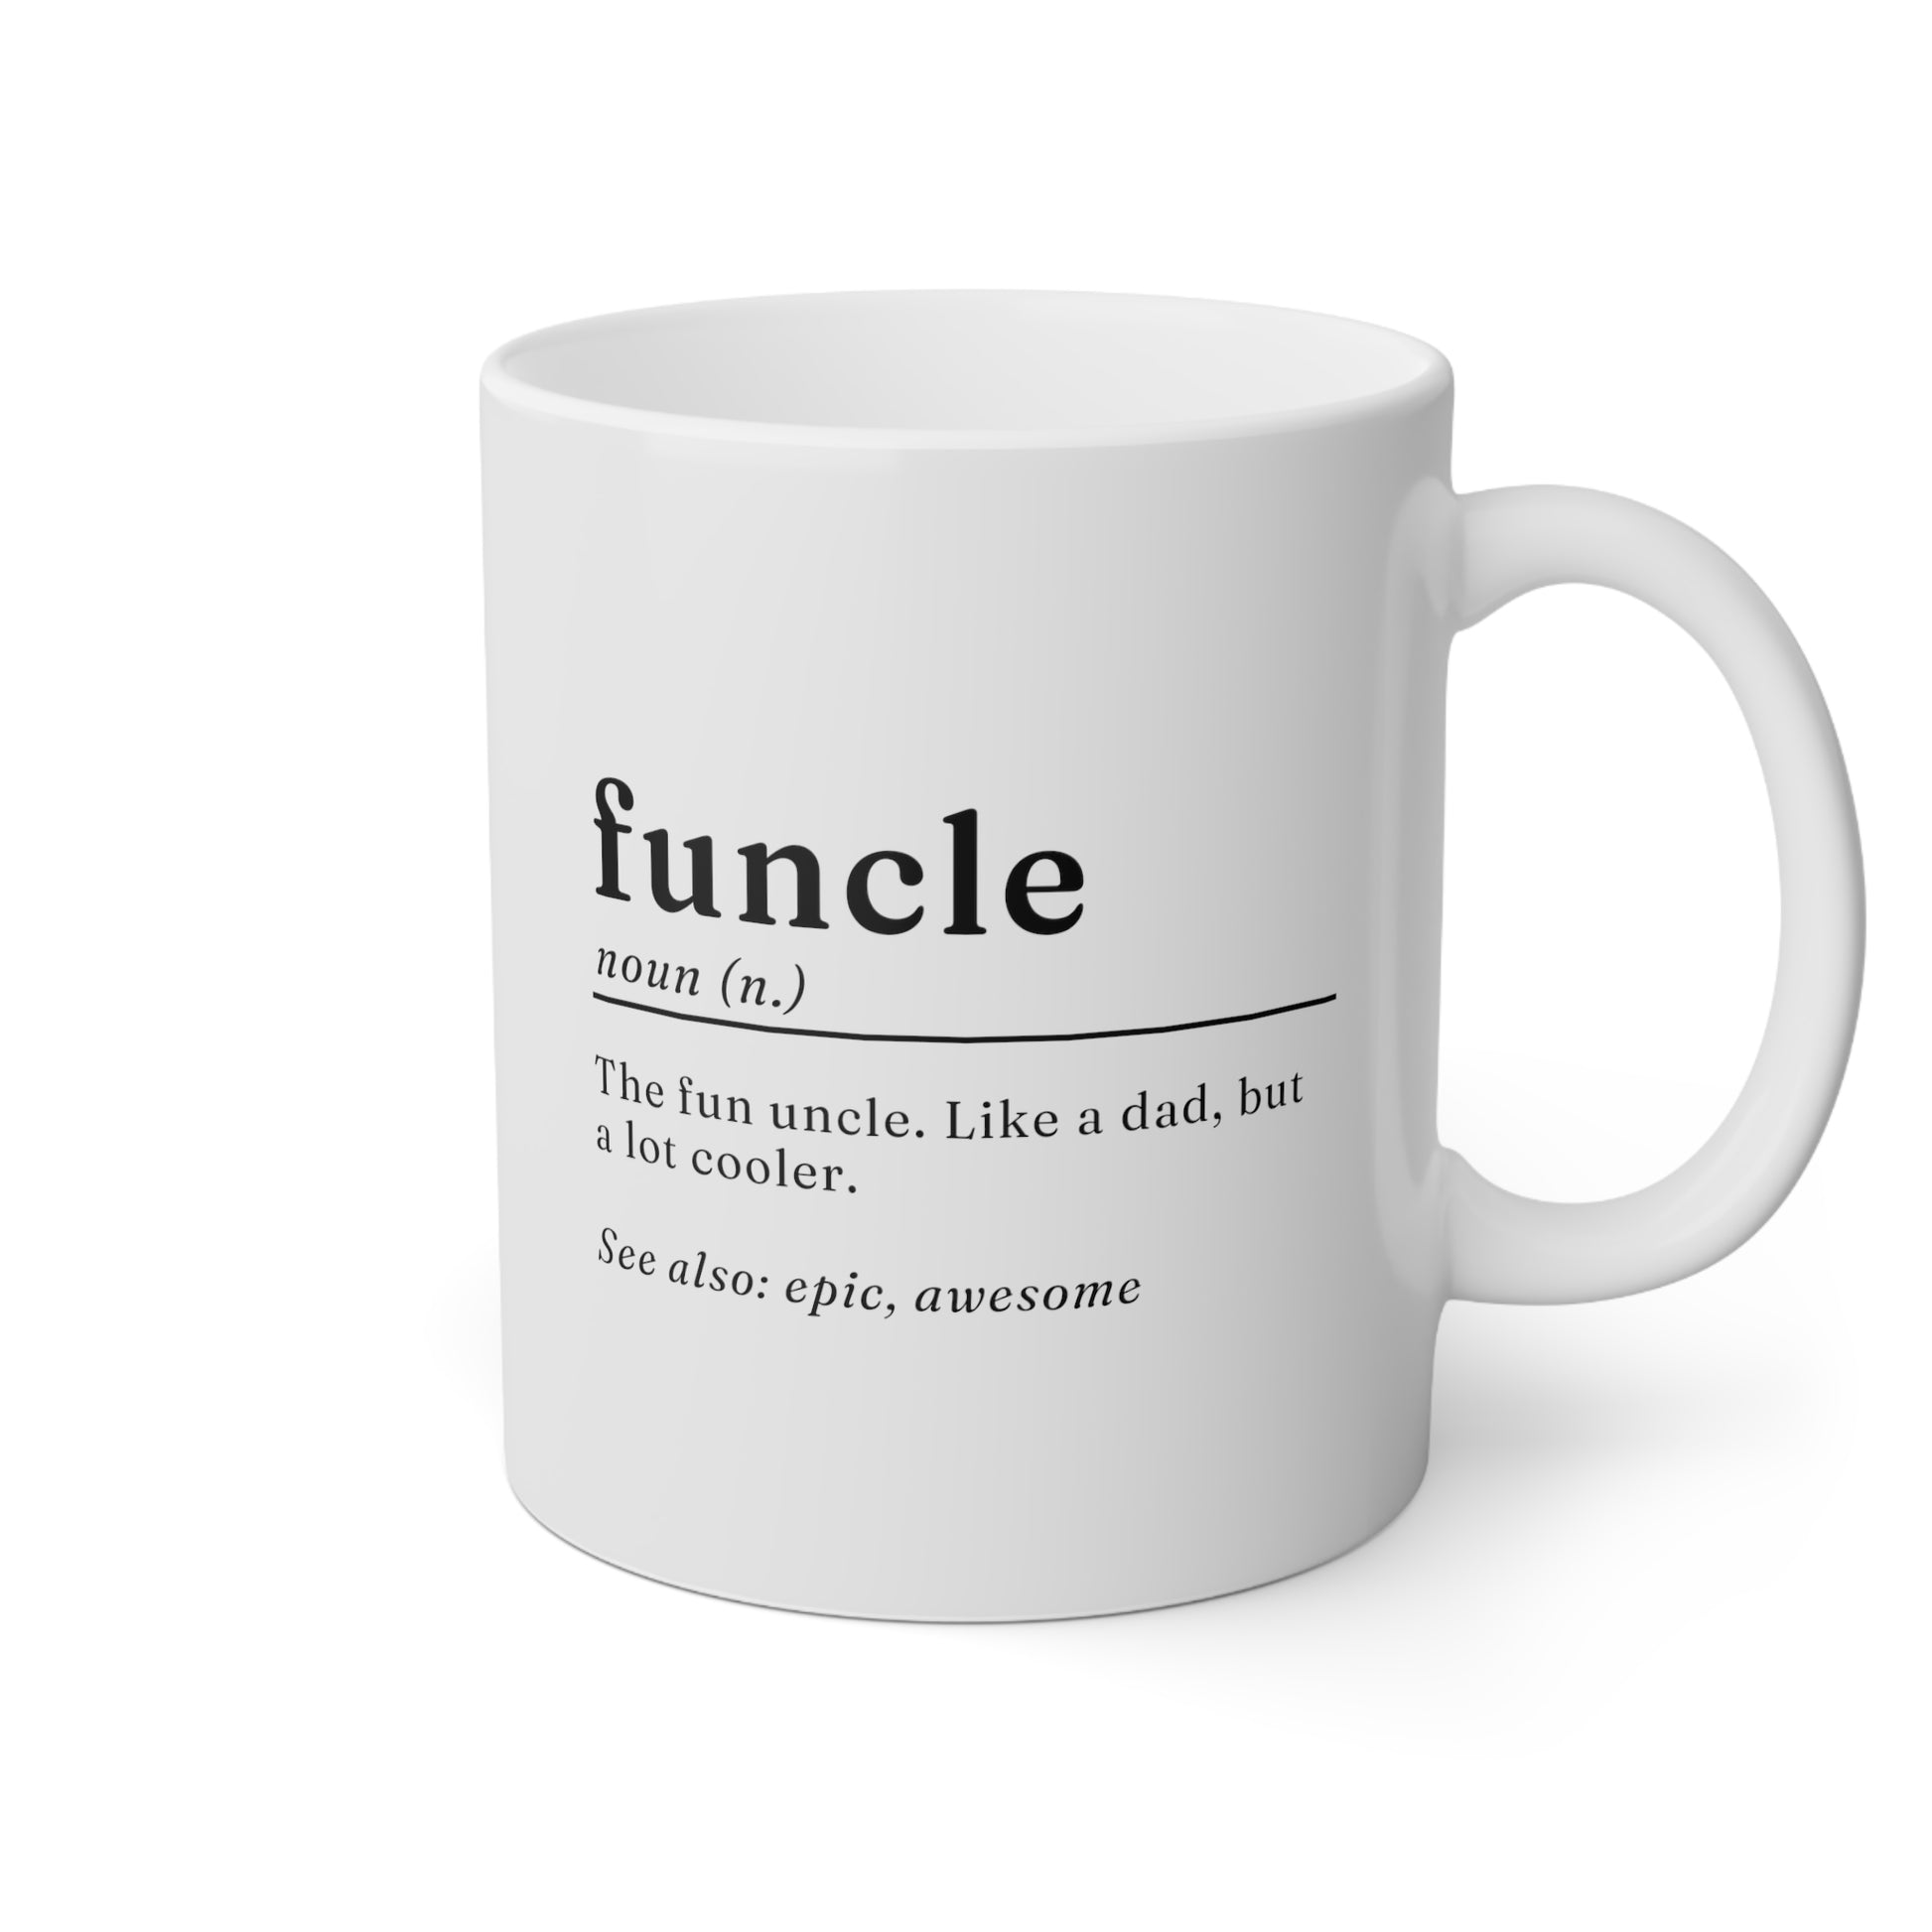 Funcle Definition 11oz white funny large coffee mug gift for fun uncle custom from niece nephew waveywares wavey wares wavywares wavy wares